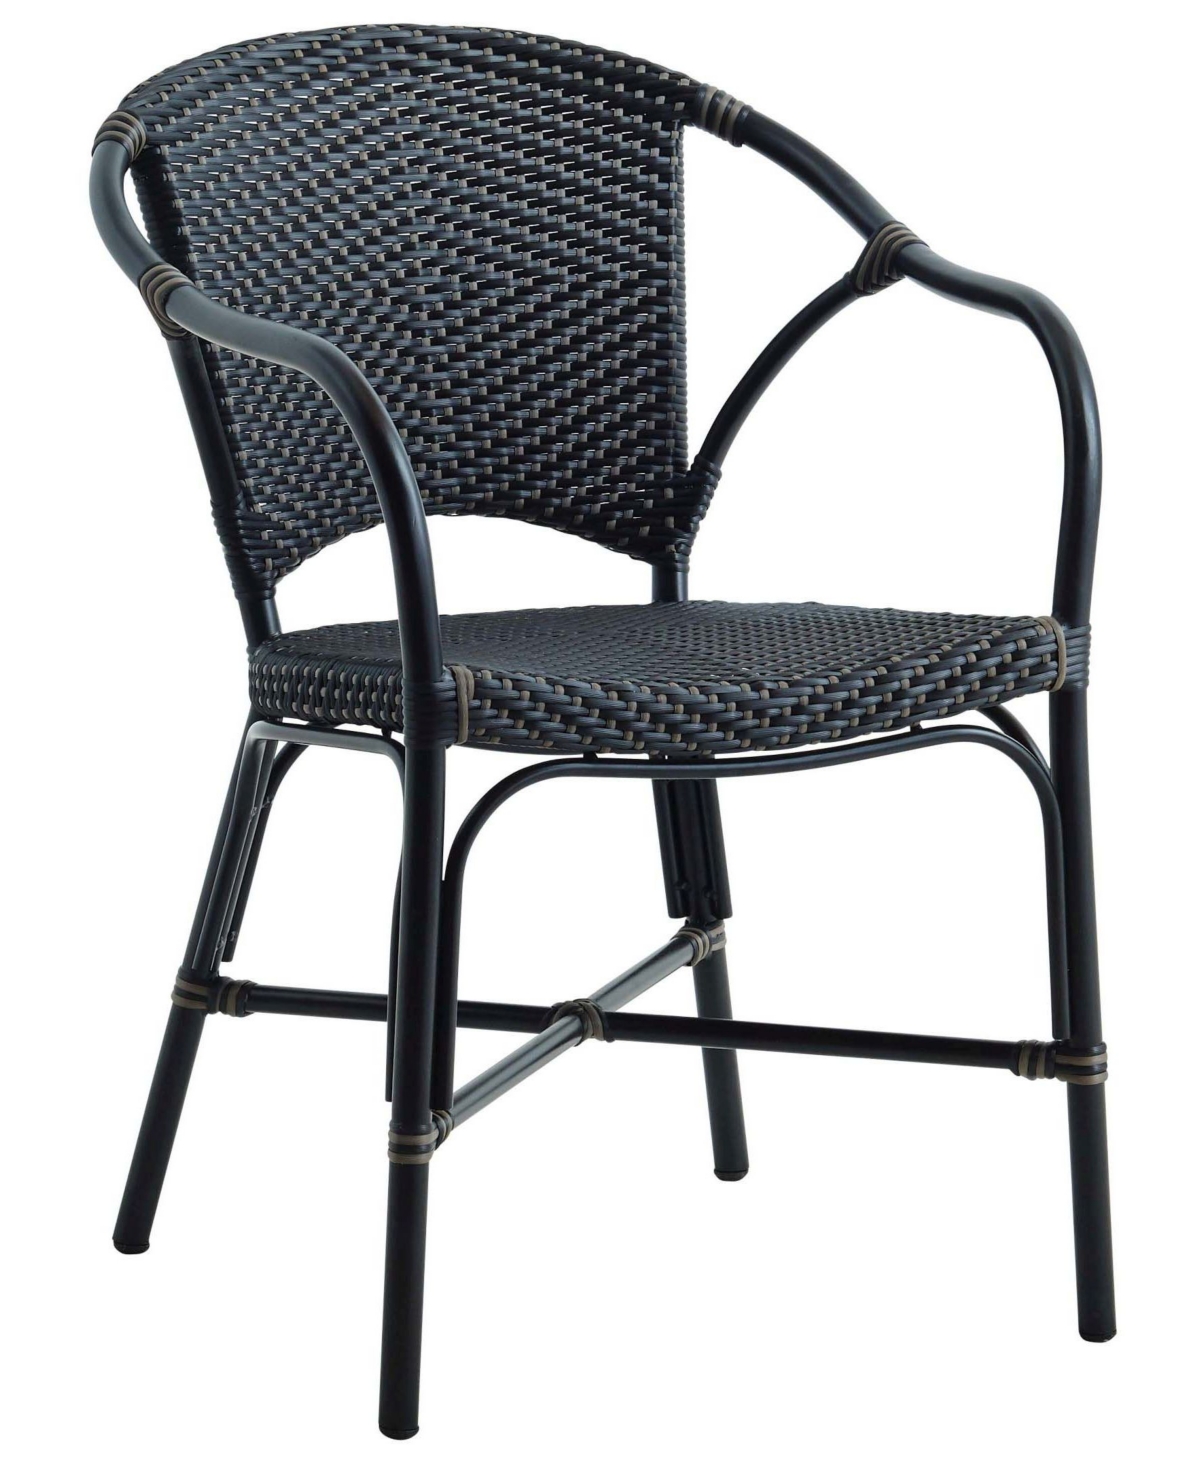 Sika Design Valerie Chair In Black,cappuccino Dots